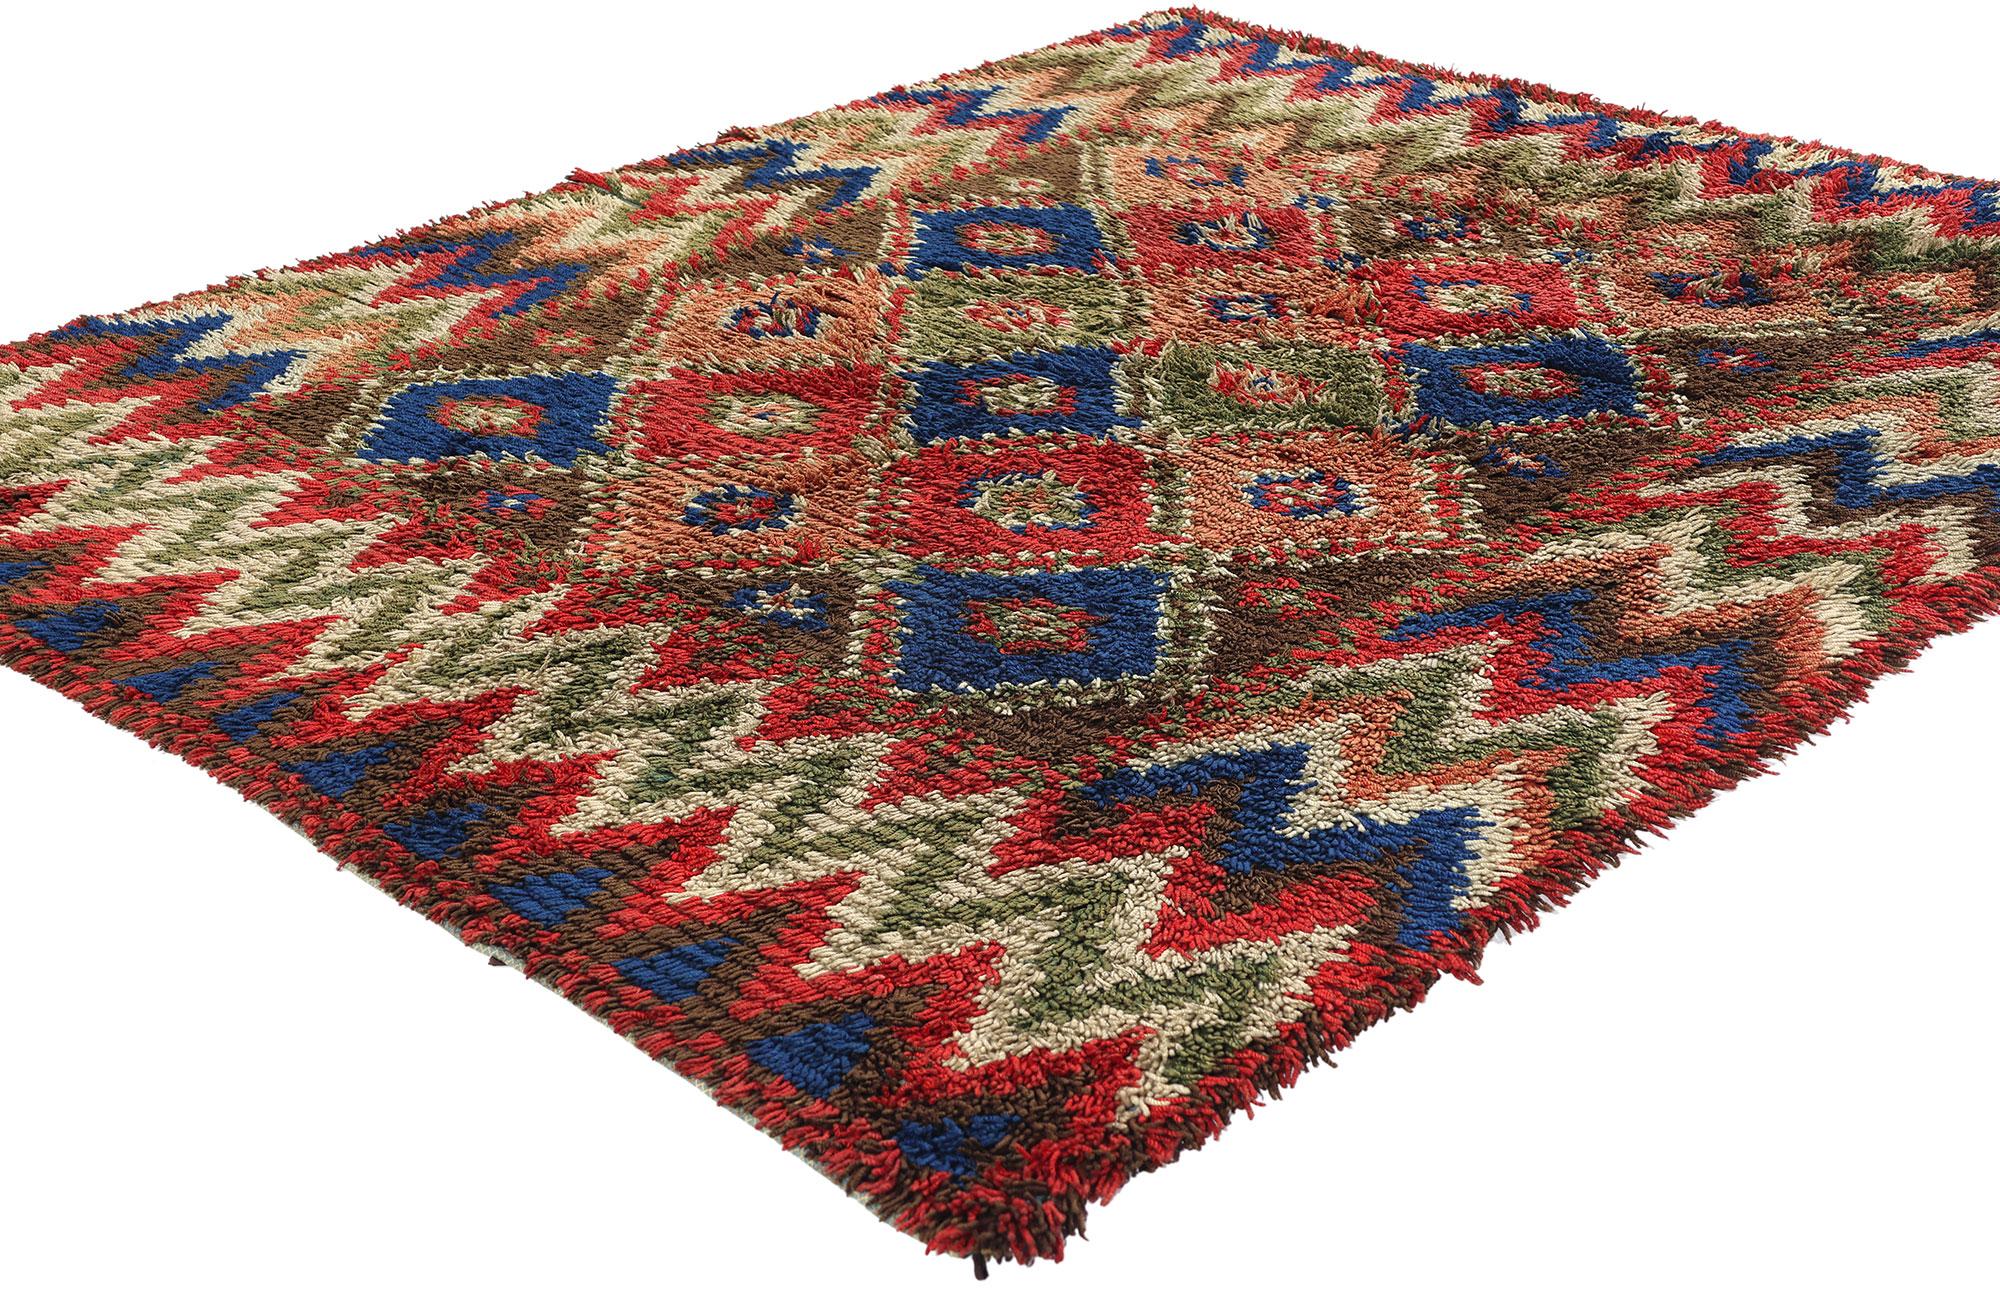 78277 Vintage Finnish Rya Ryijy Rug, 04'07 x 05'09. Finnish Ryijy Rya rugs, commonly known as Ryijy rugs, are a cherished aspect of Finnish textile art, recognized for their thick pile, intricate designs, and vibrant colors. Handwoven using